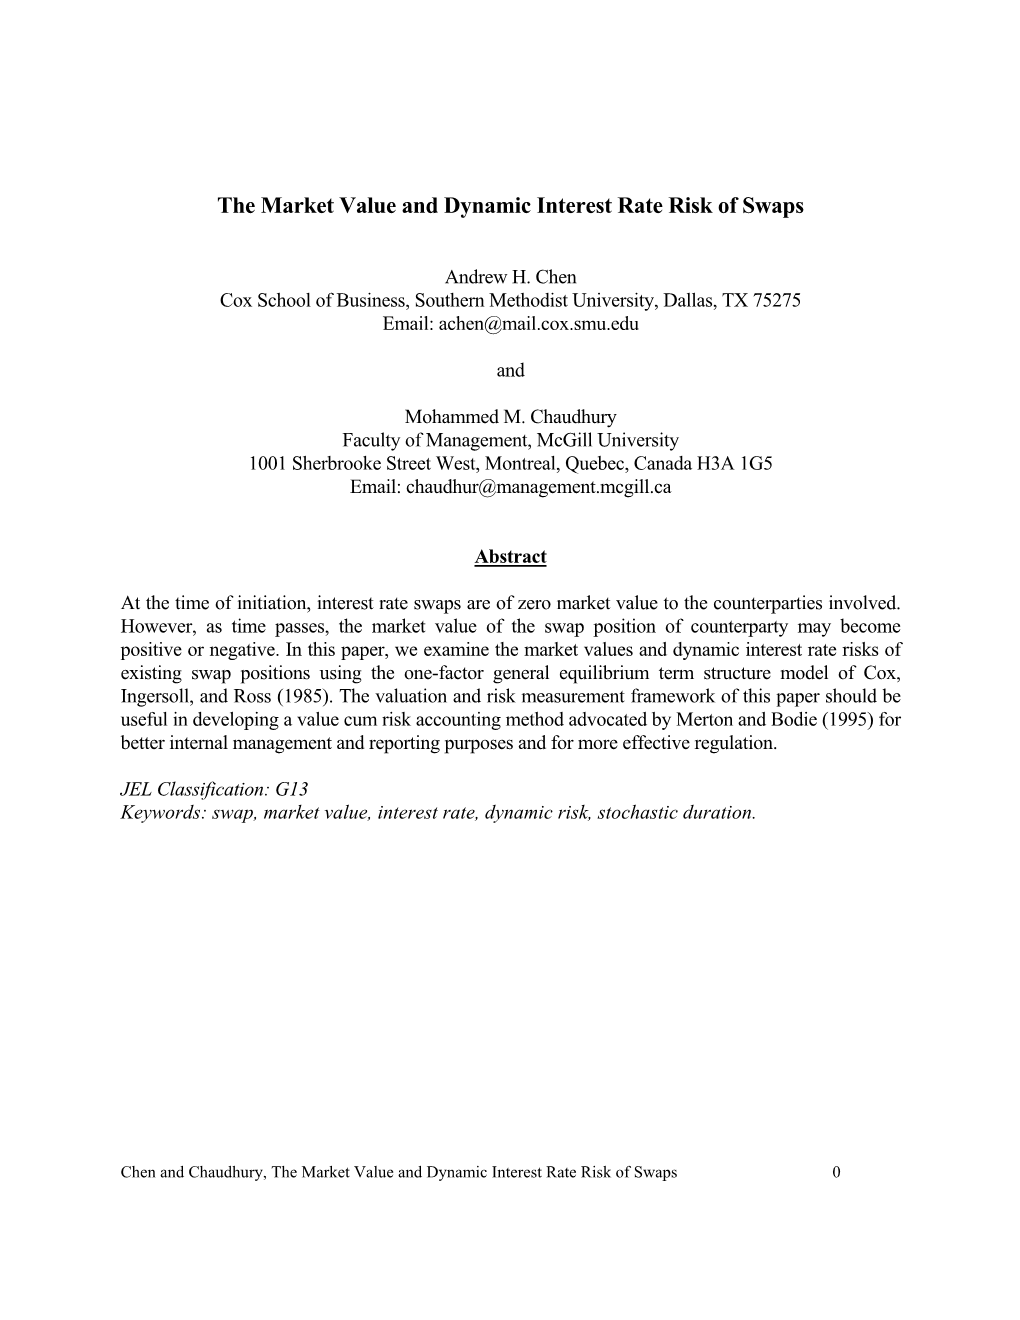 The Market Value and Dynamic Interest Rate Risk of Swaps